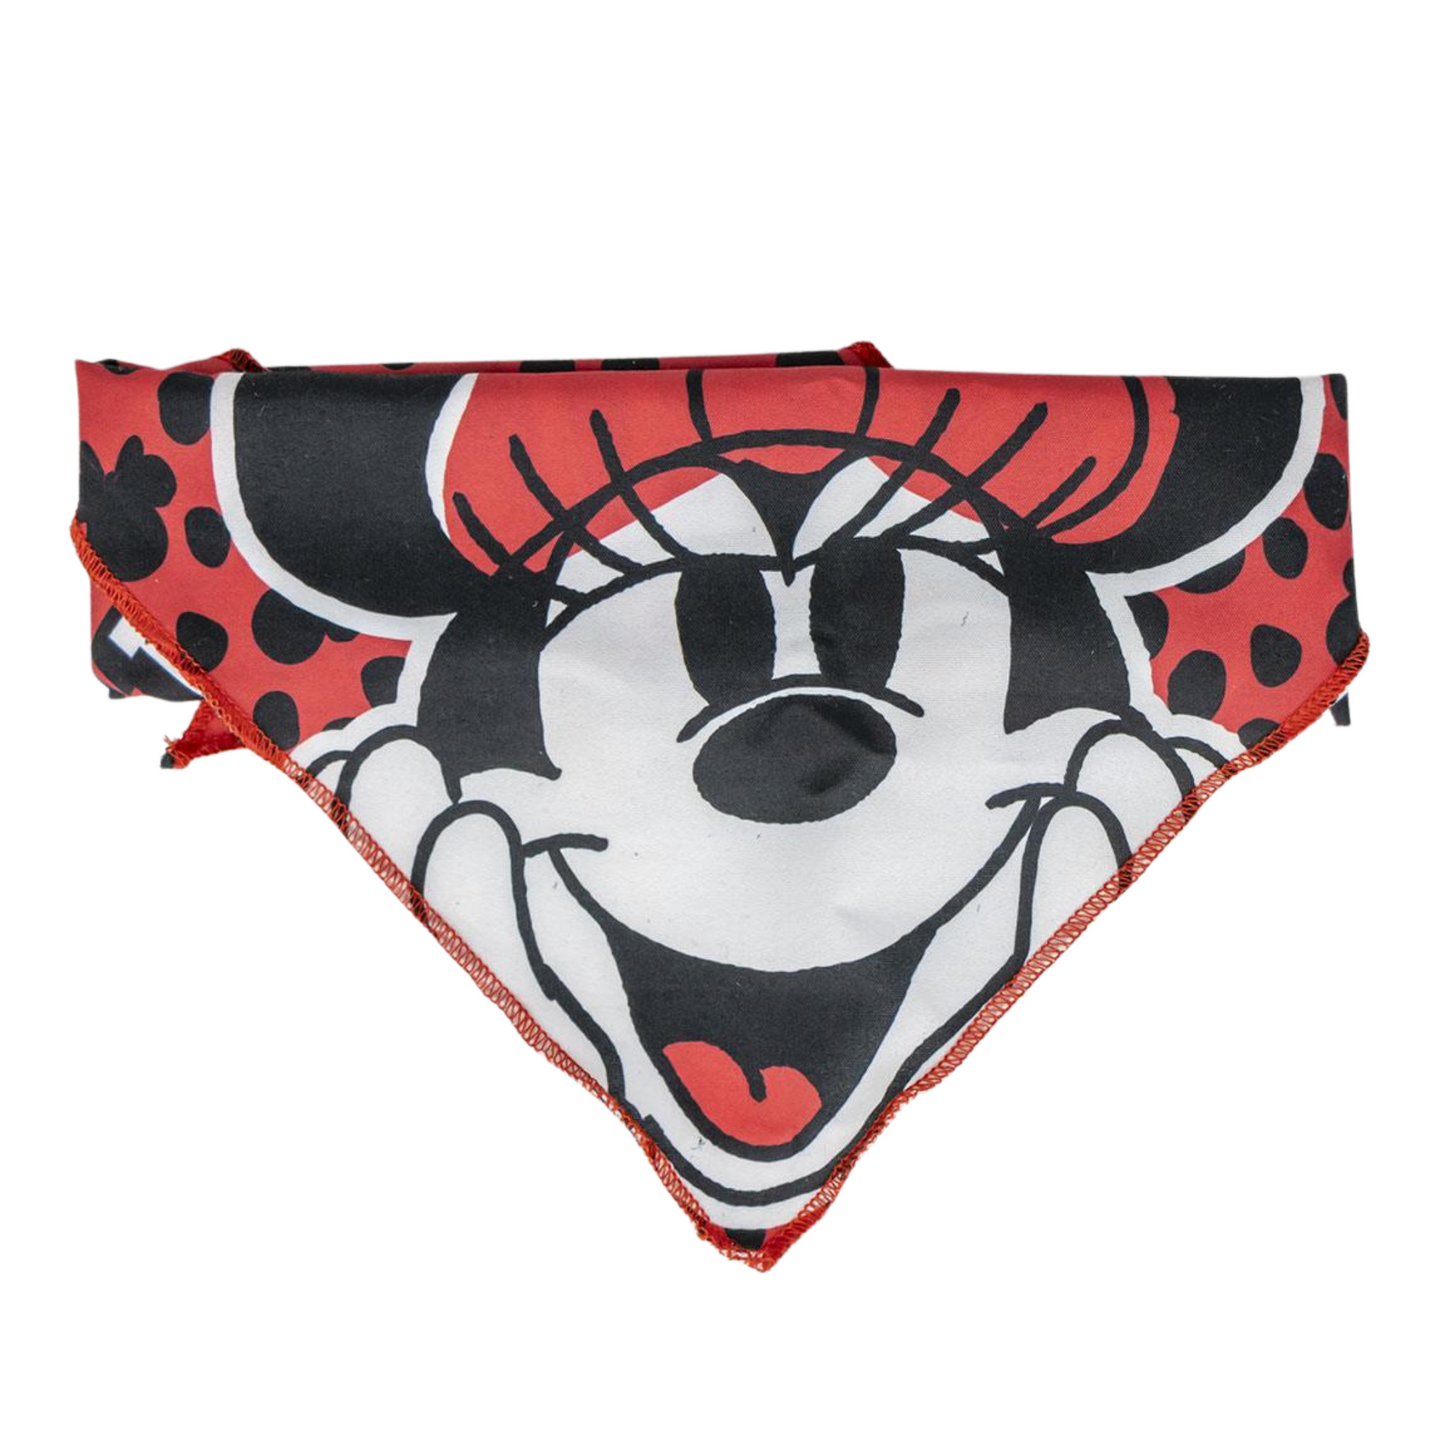 Minnie Mouse Disney Gift Set For Dogs